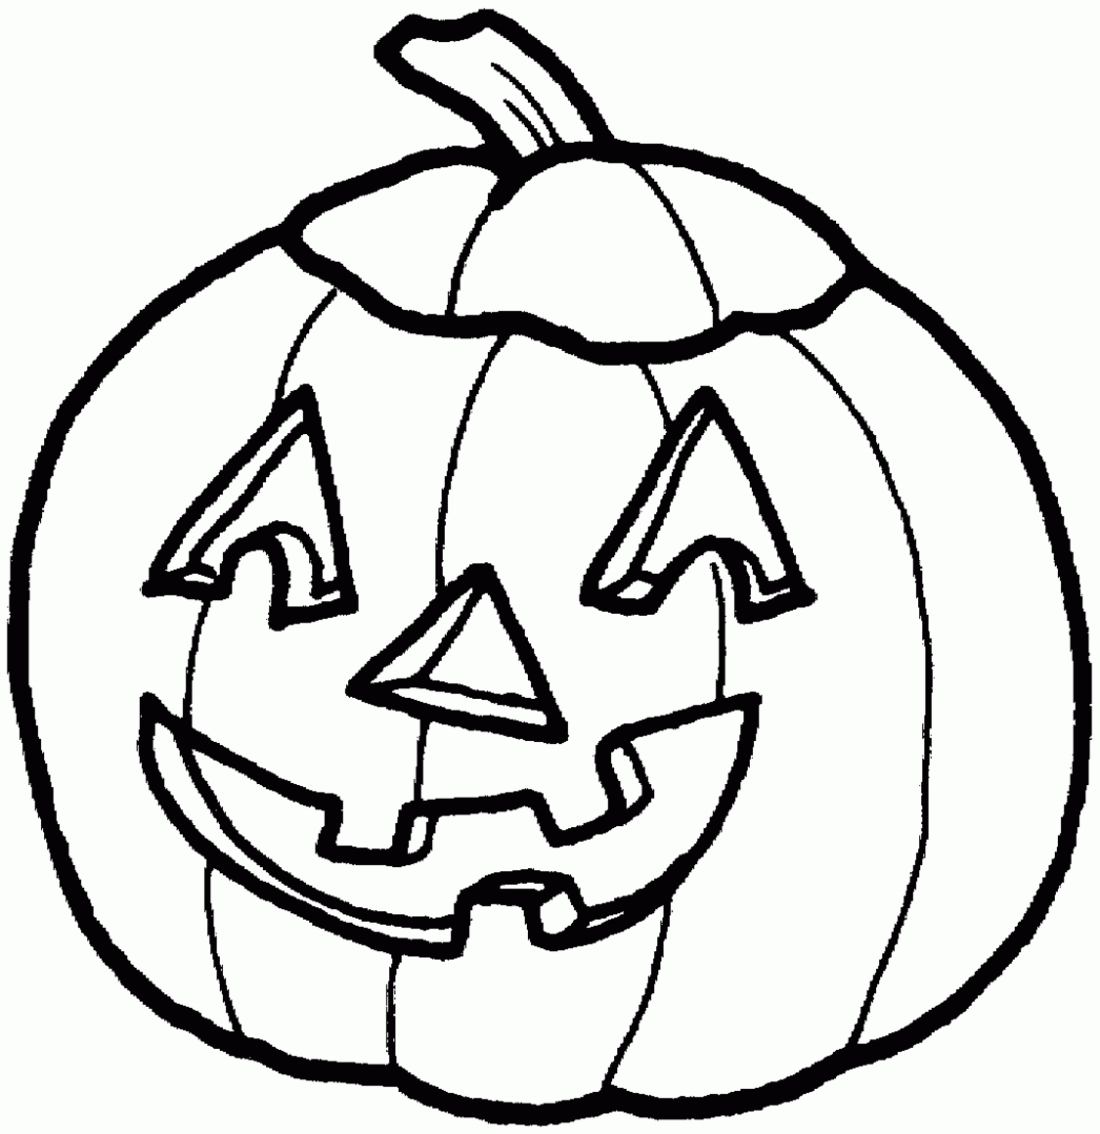 Free Printable Pumpkin Coloring Pages For Kids | Pumpkins | Pumpkin - Free Printable Pumpkin Coloring Pages